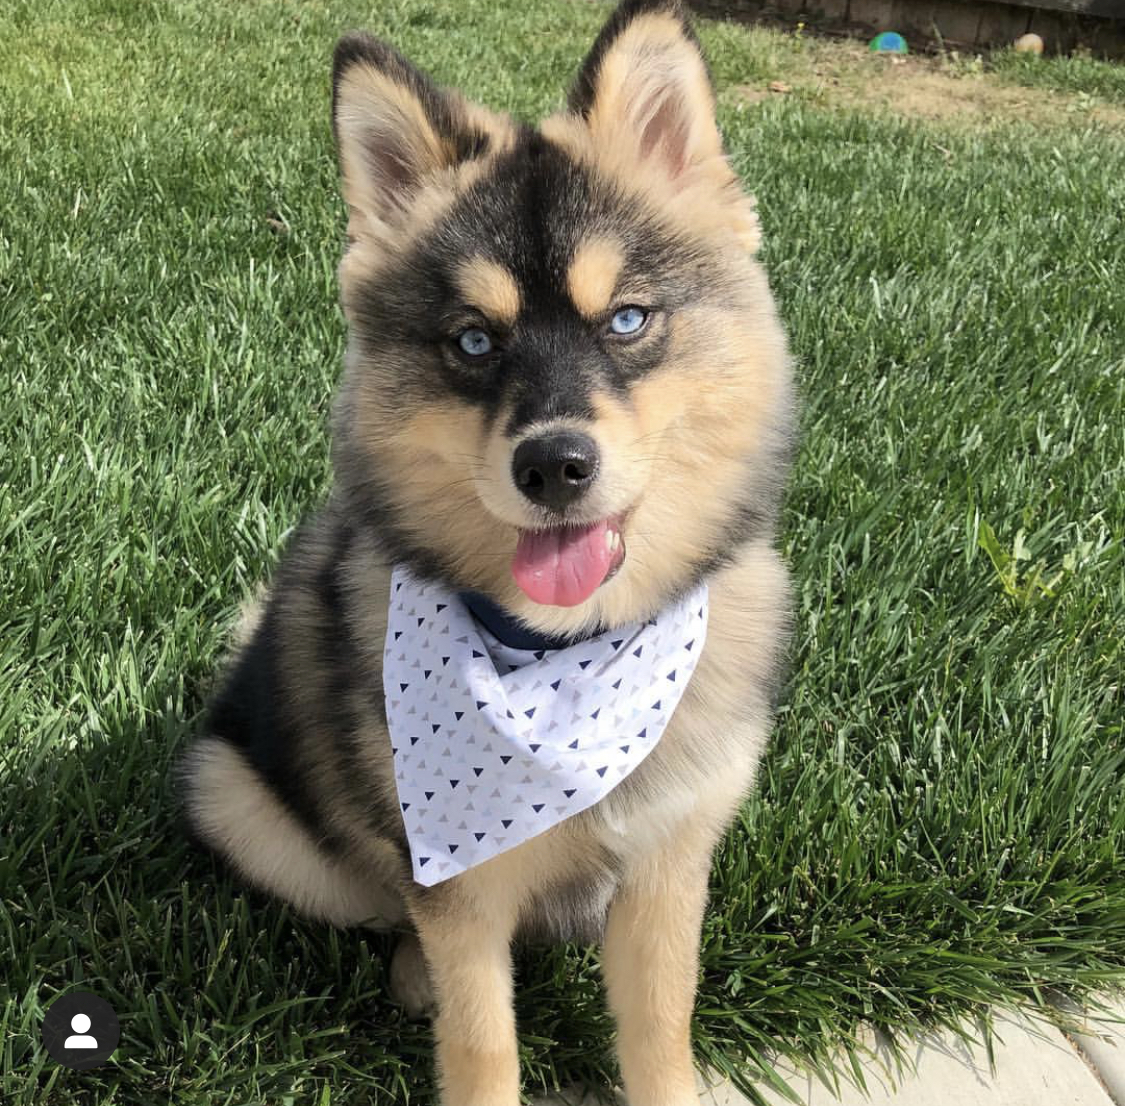 A Pomsky wearing a scarf while sitting on the grass in the yard